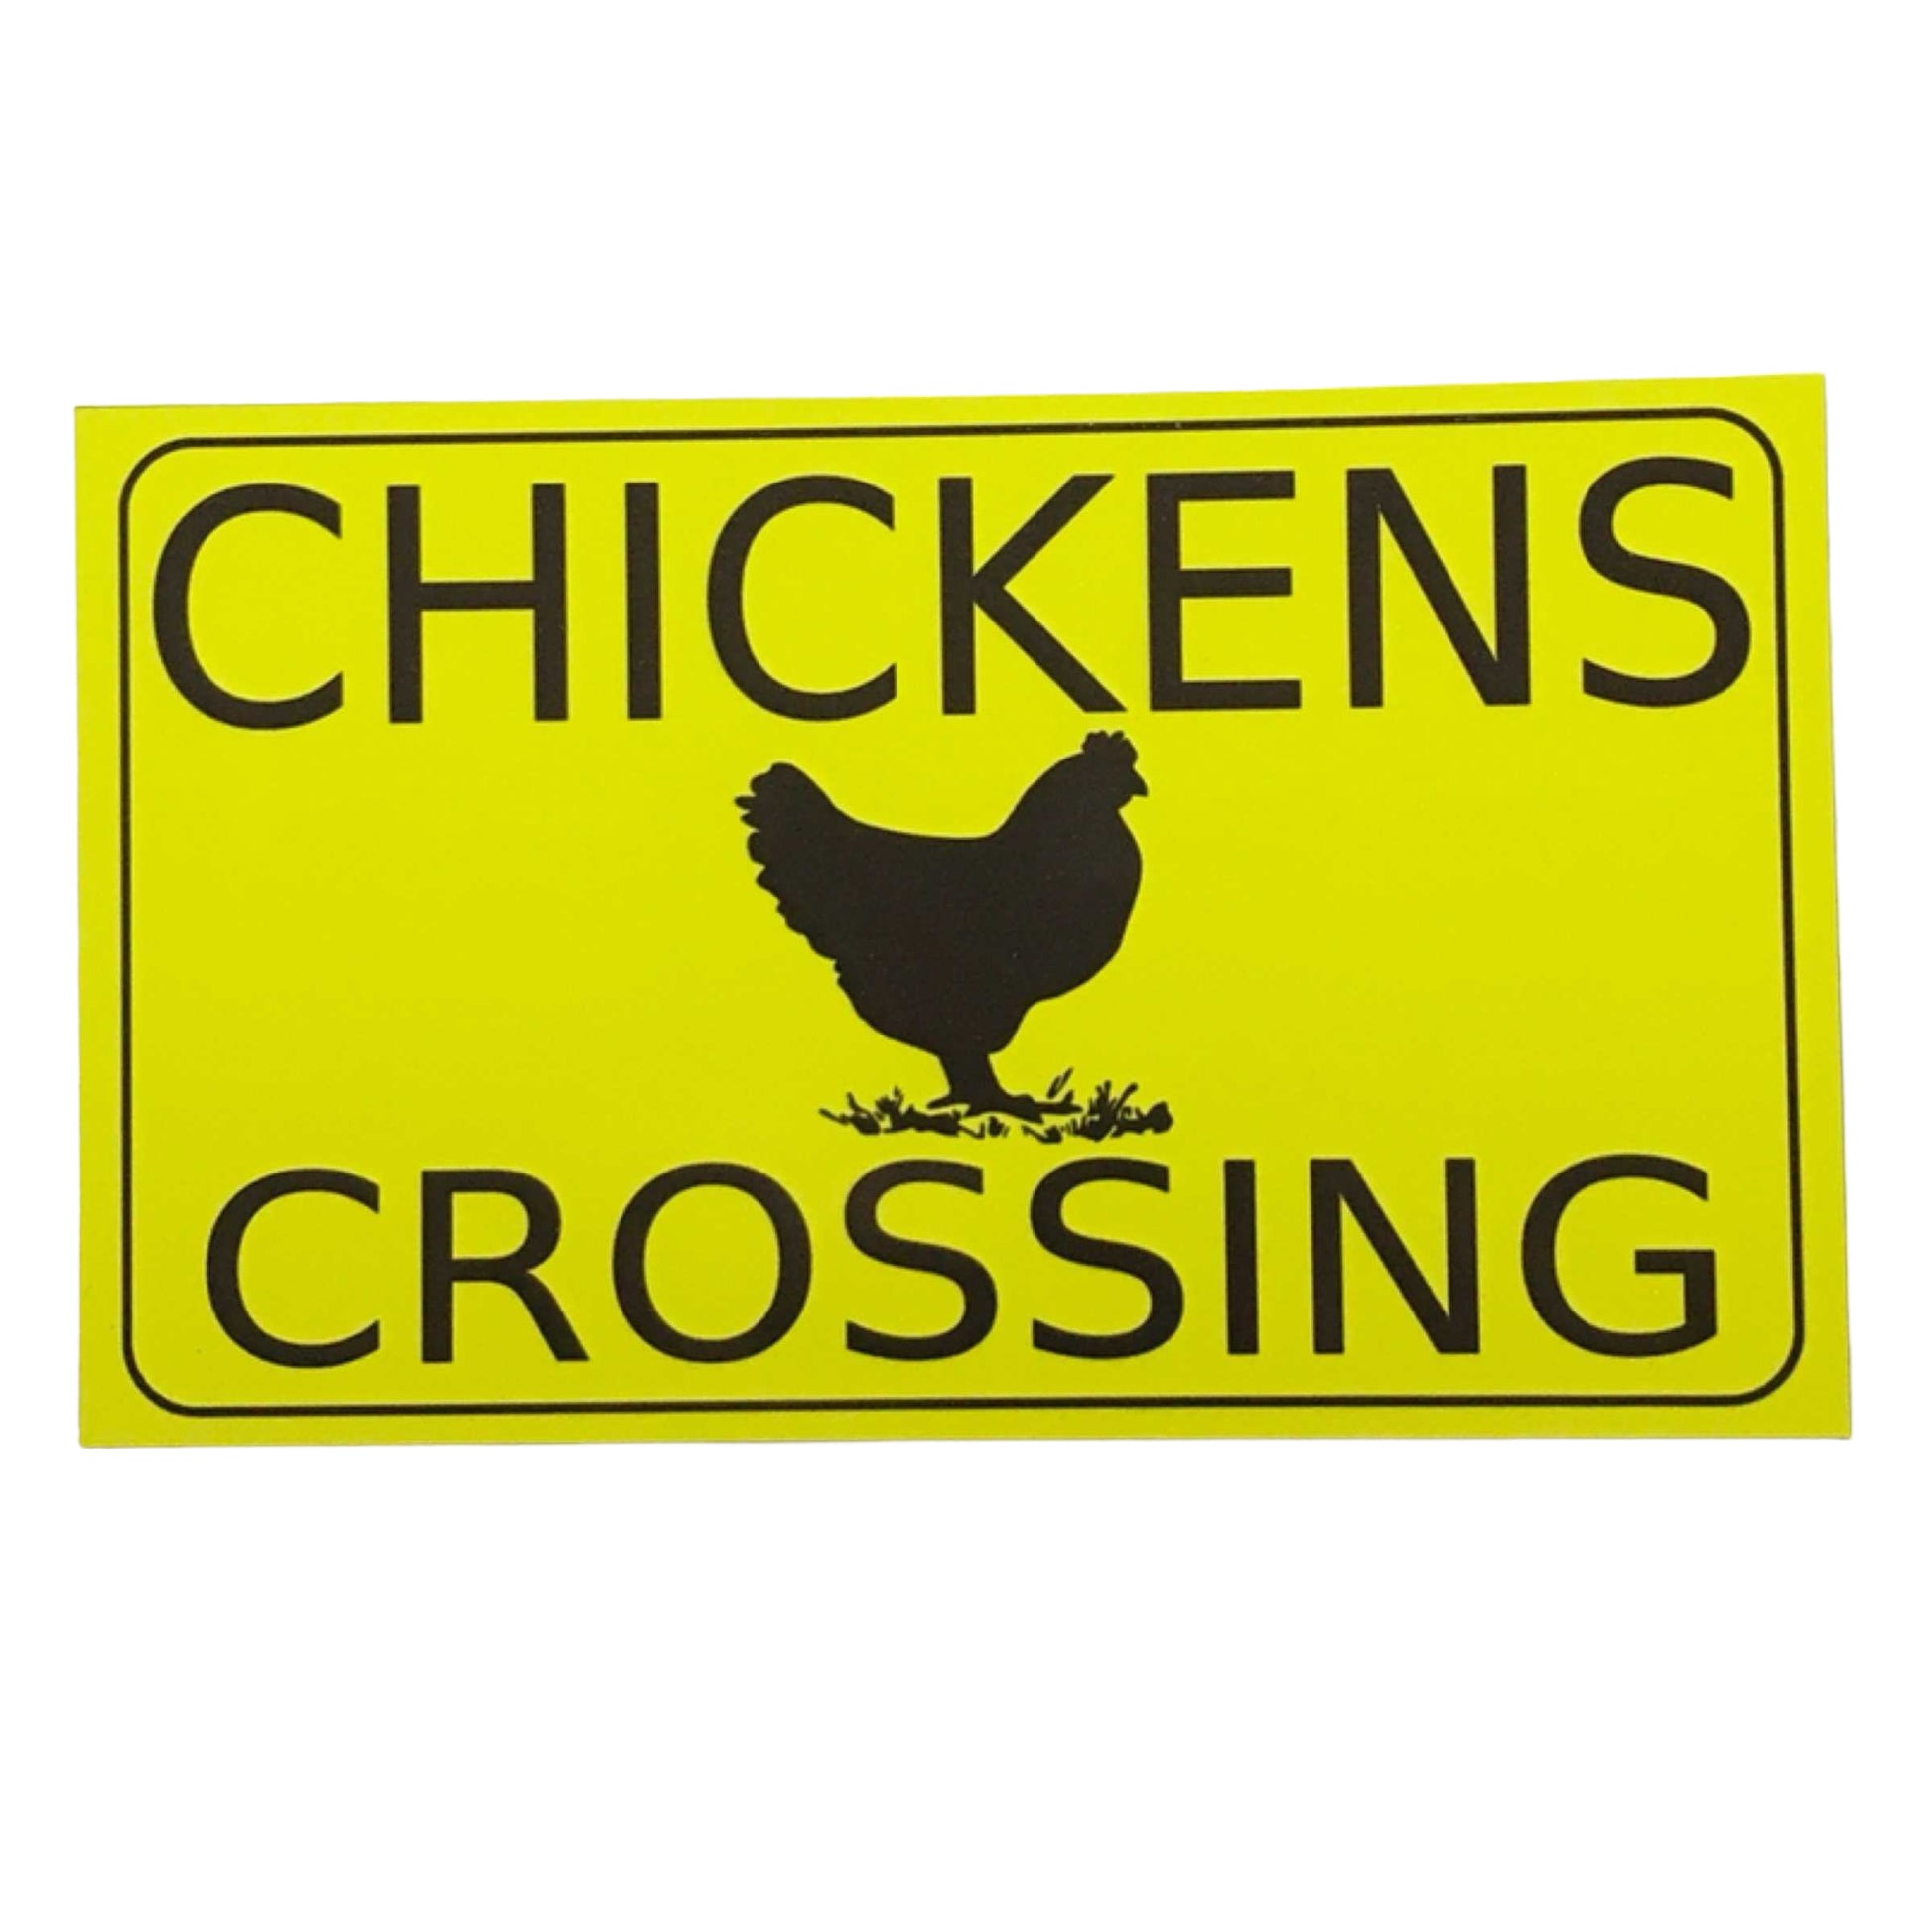 Chickens Crossing Sign - The Renmy Store Homewares & Gifts 